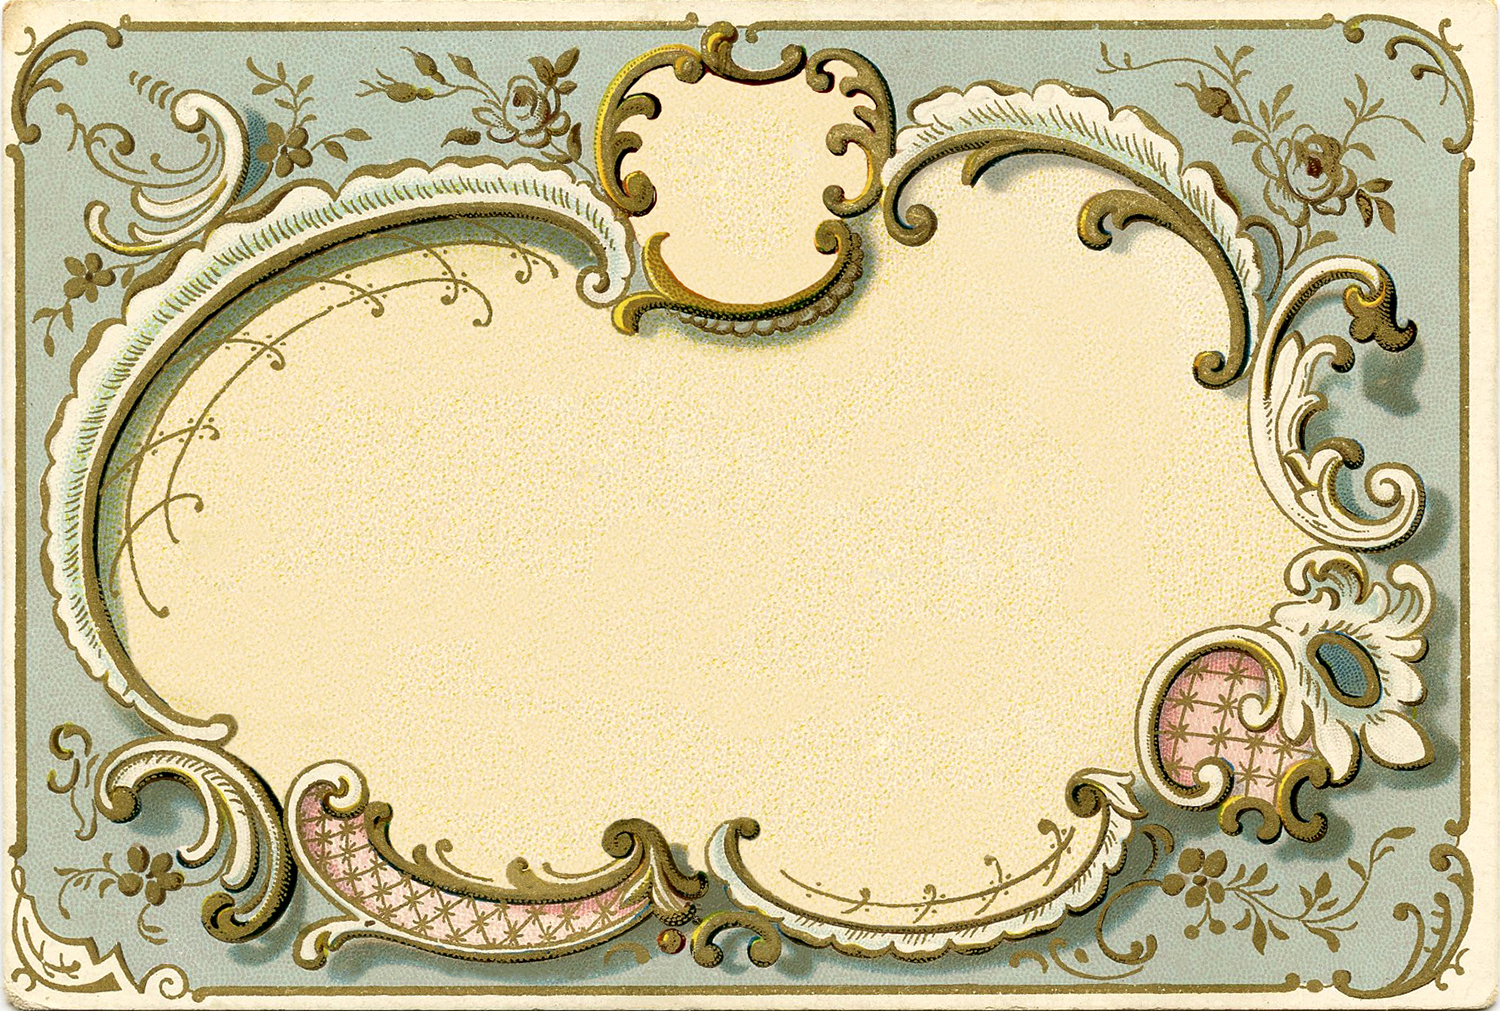 Spectacular French Graphic Frame Image   The Graphics Fairy